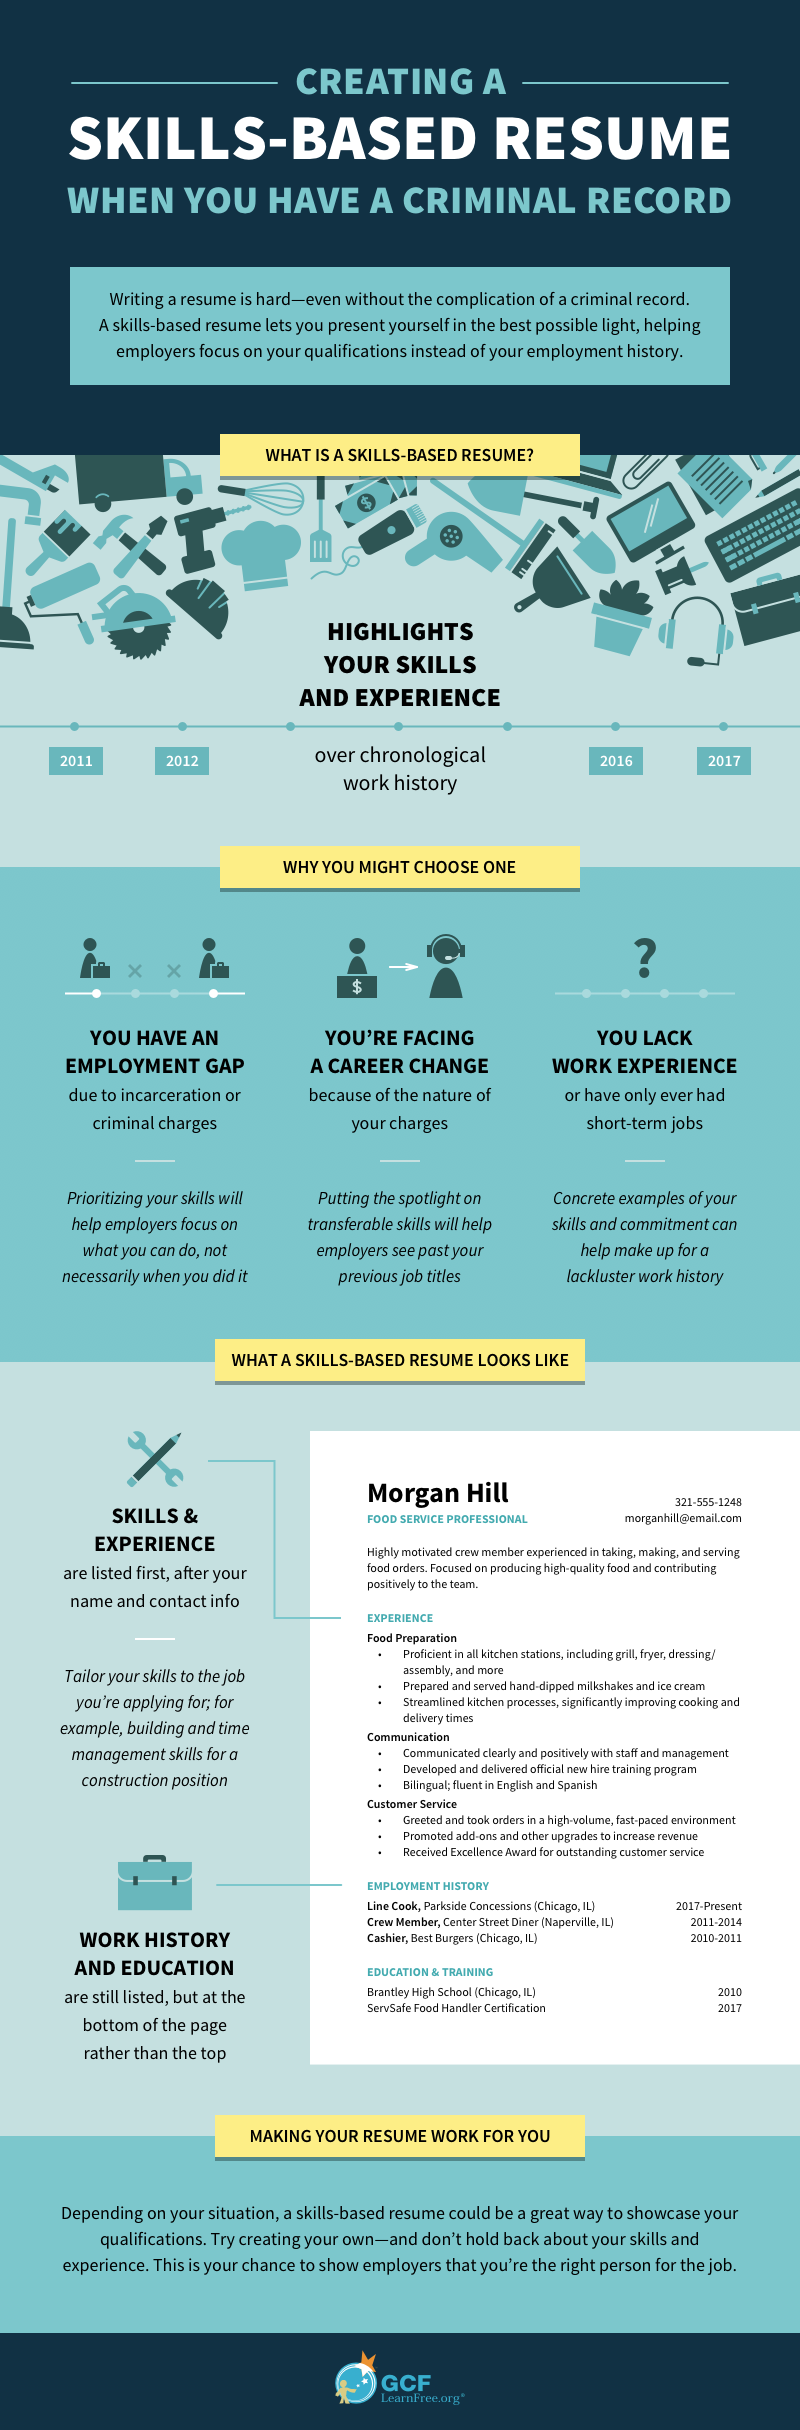 An infographic that details how to create a skills-based resume with a criminal record.